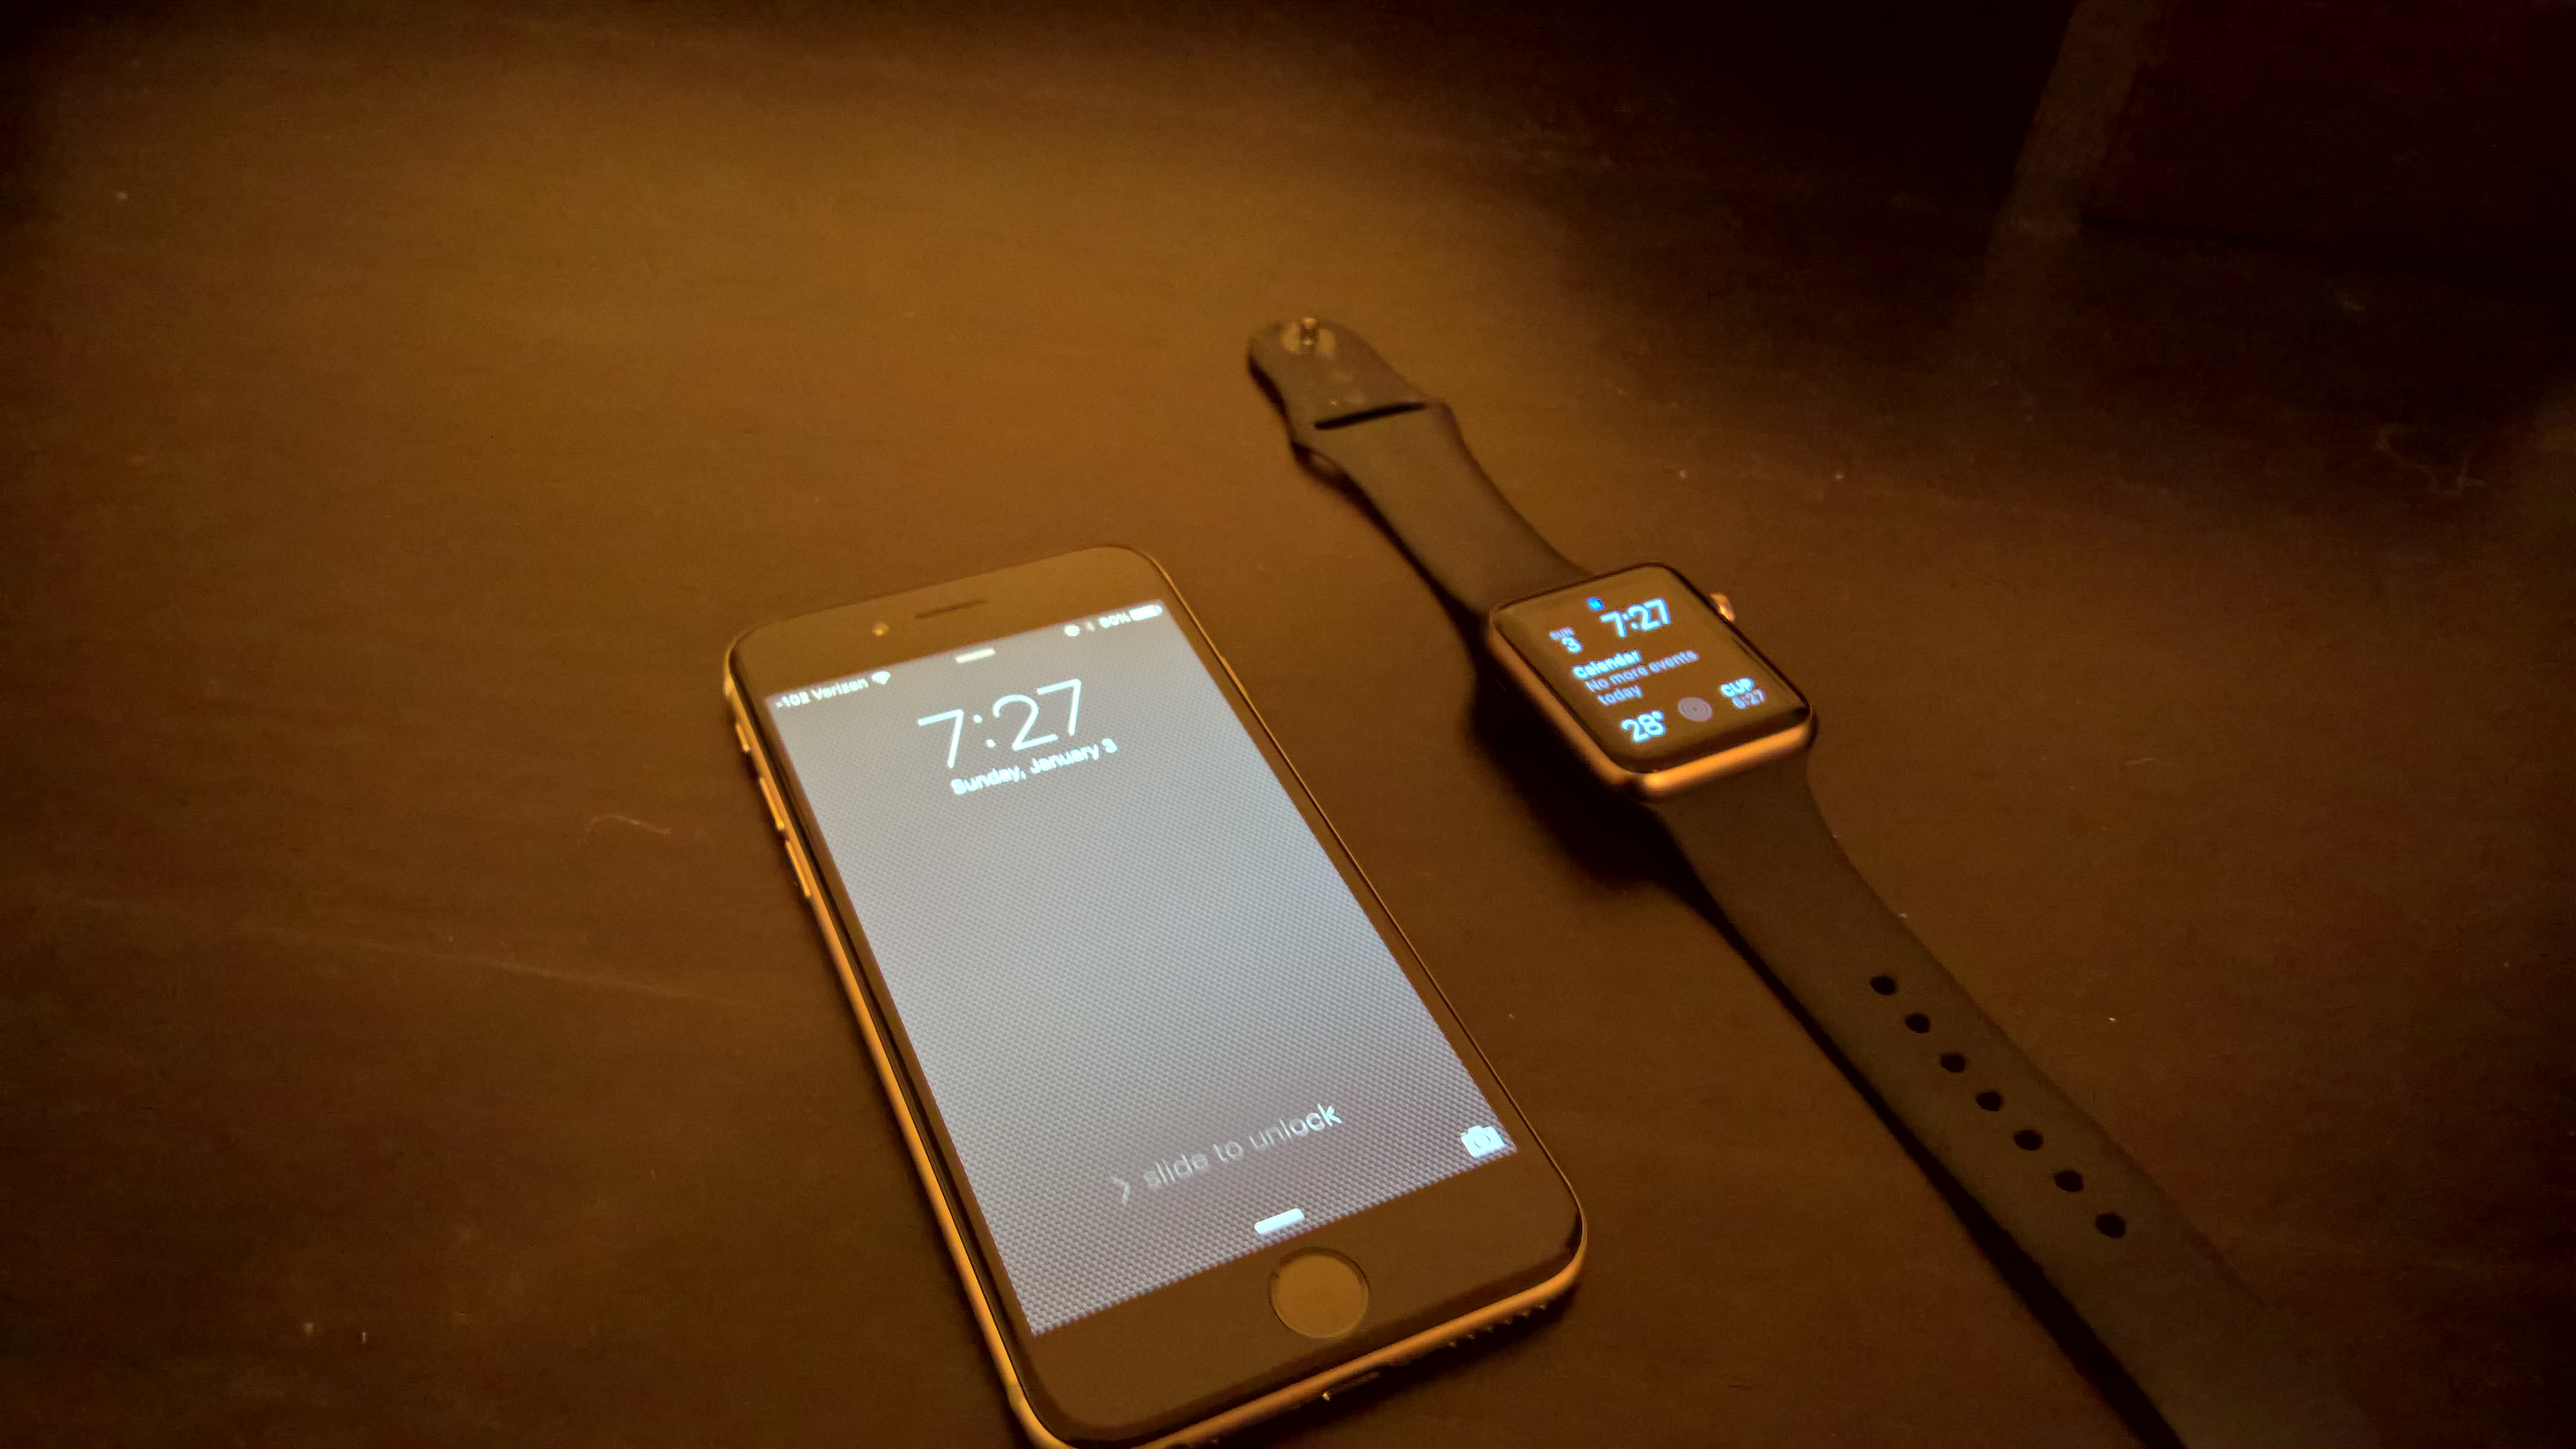 Apple phone and watch